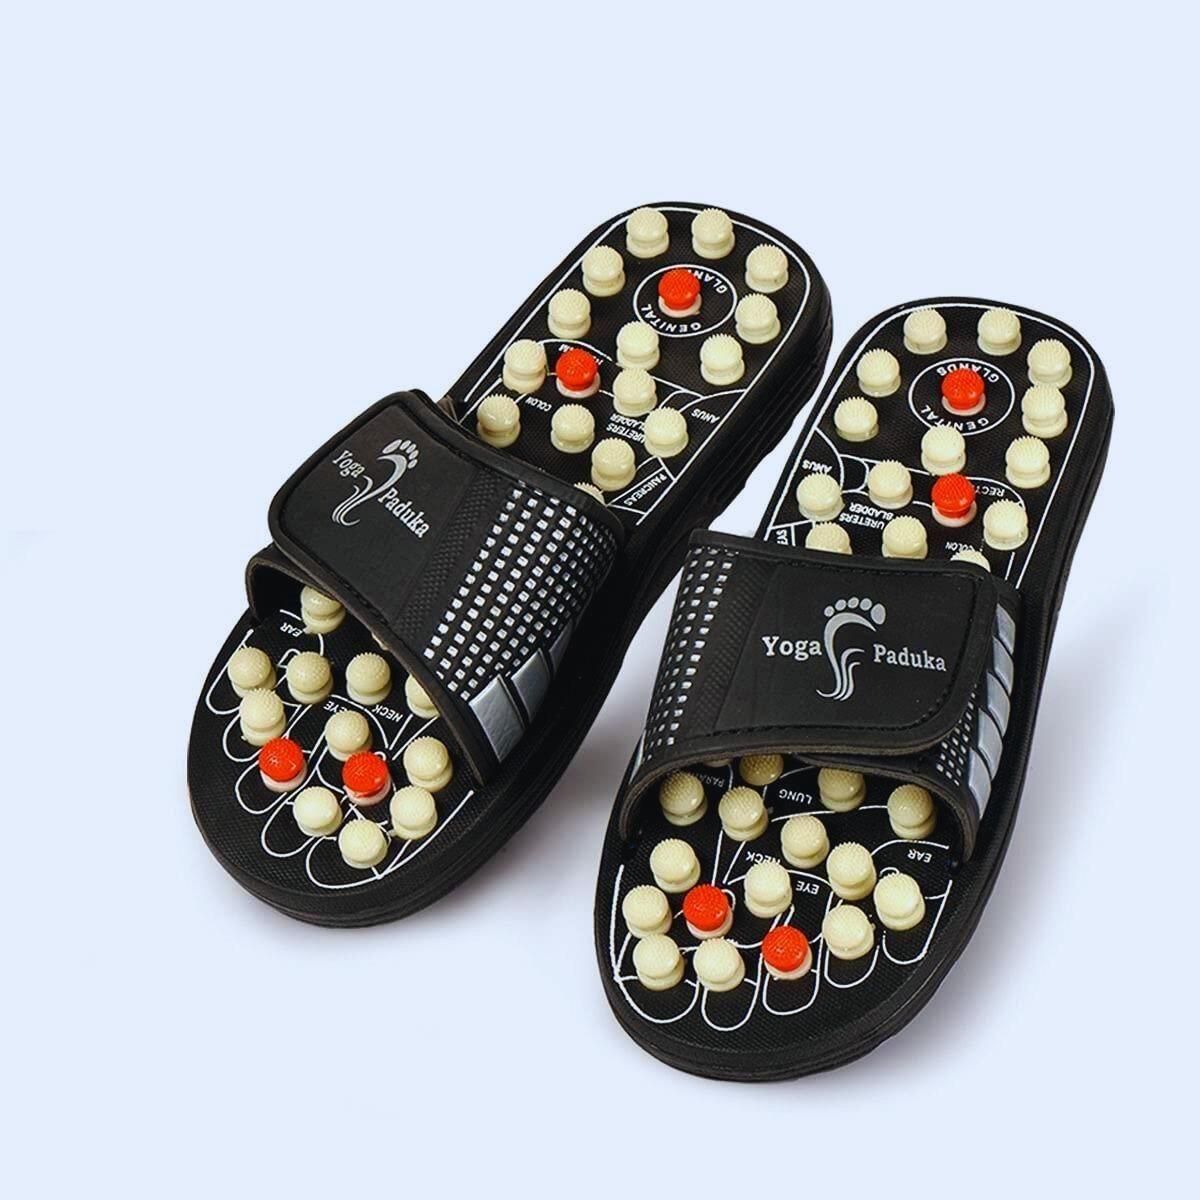 Acupressure and Magnetic Therapy Paduka Slippers For Men and Women